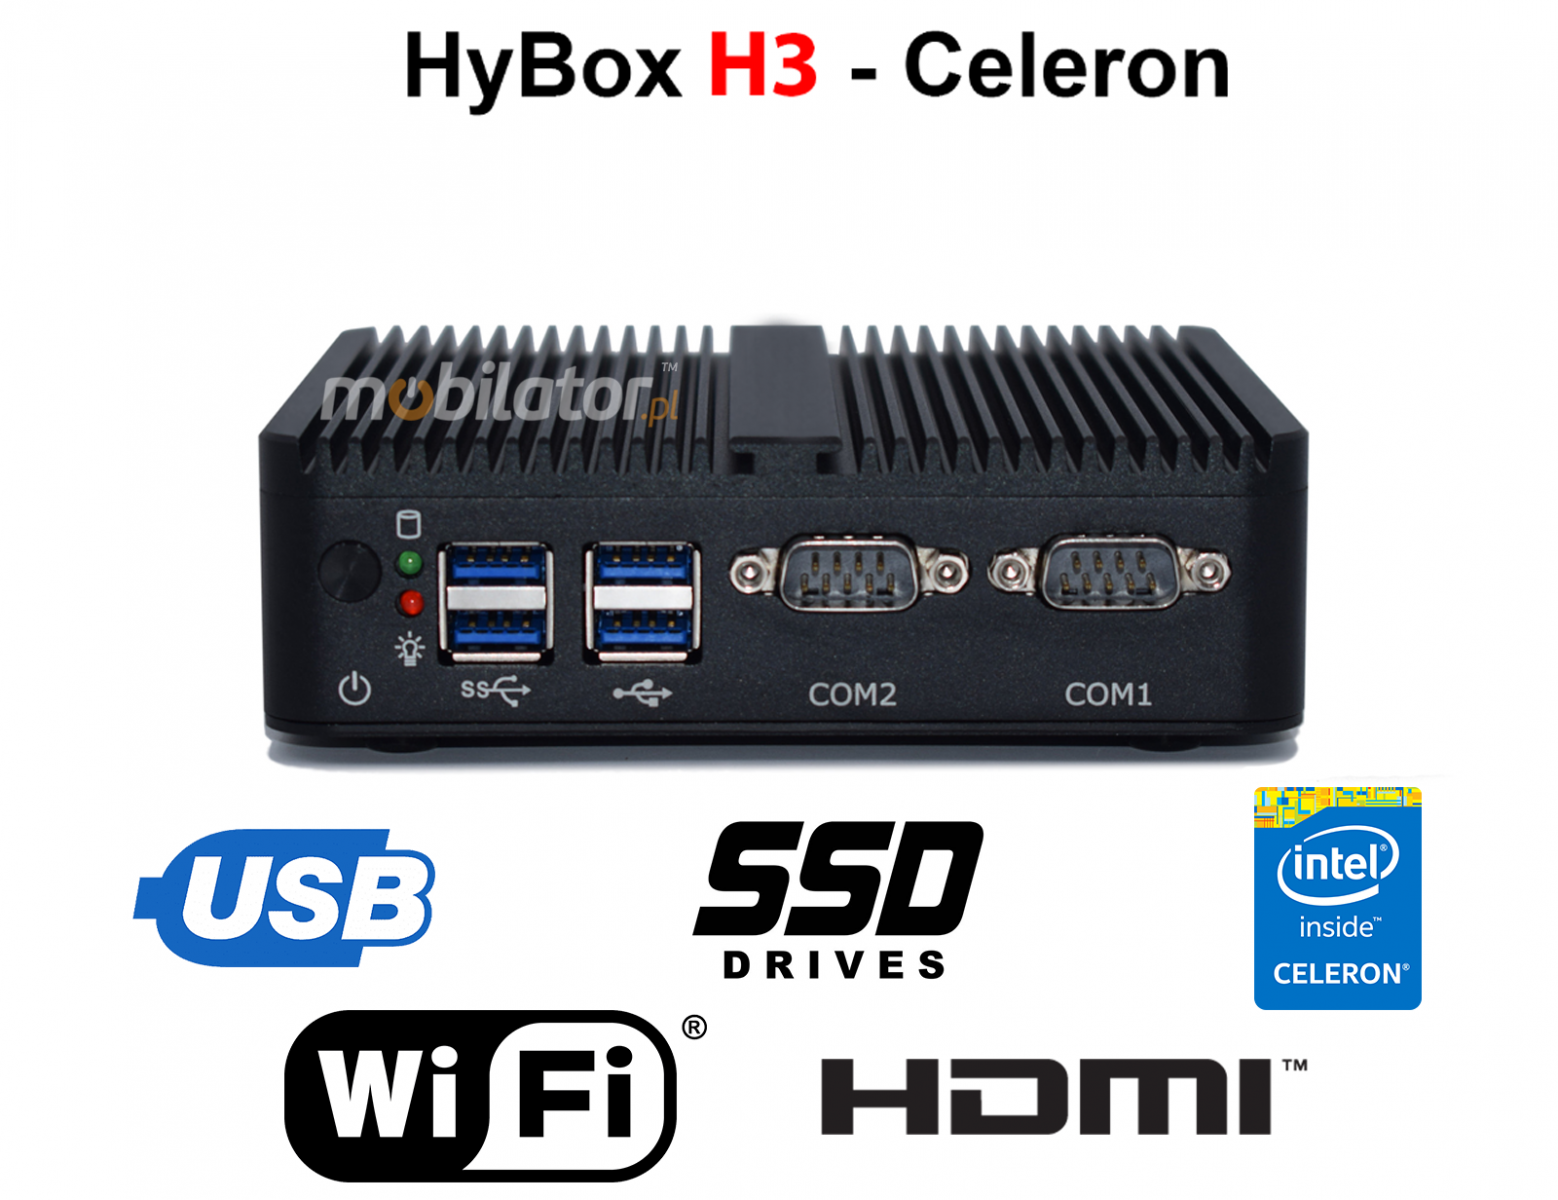 HyBOX H3 small reliable fast and efficient mini pc Linux